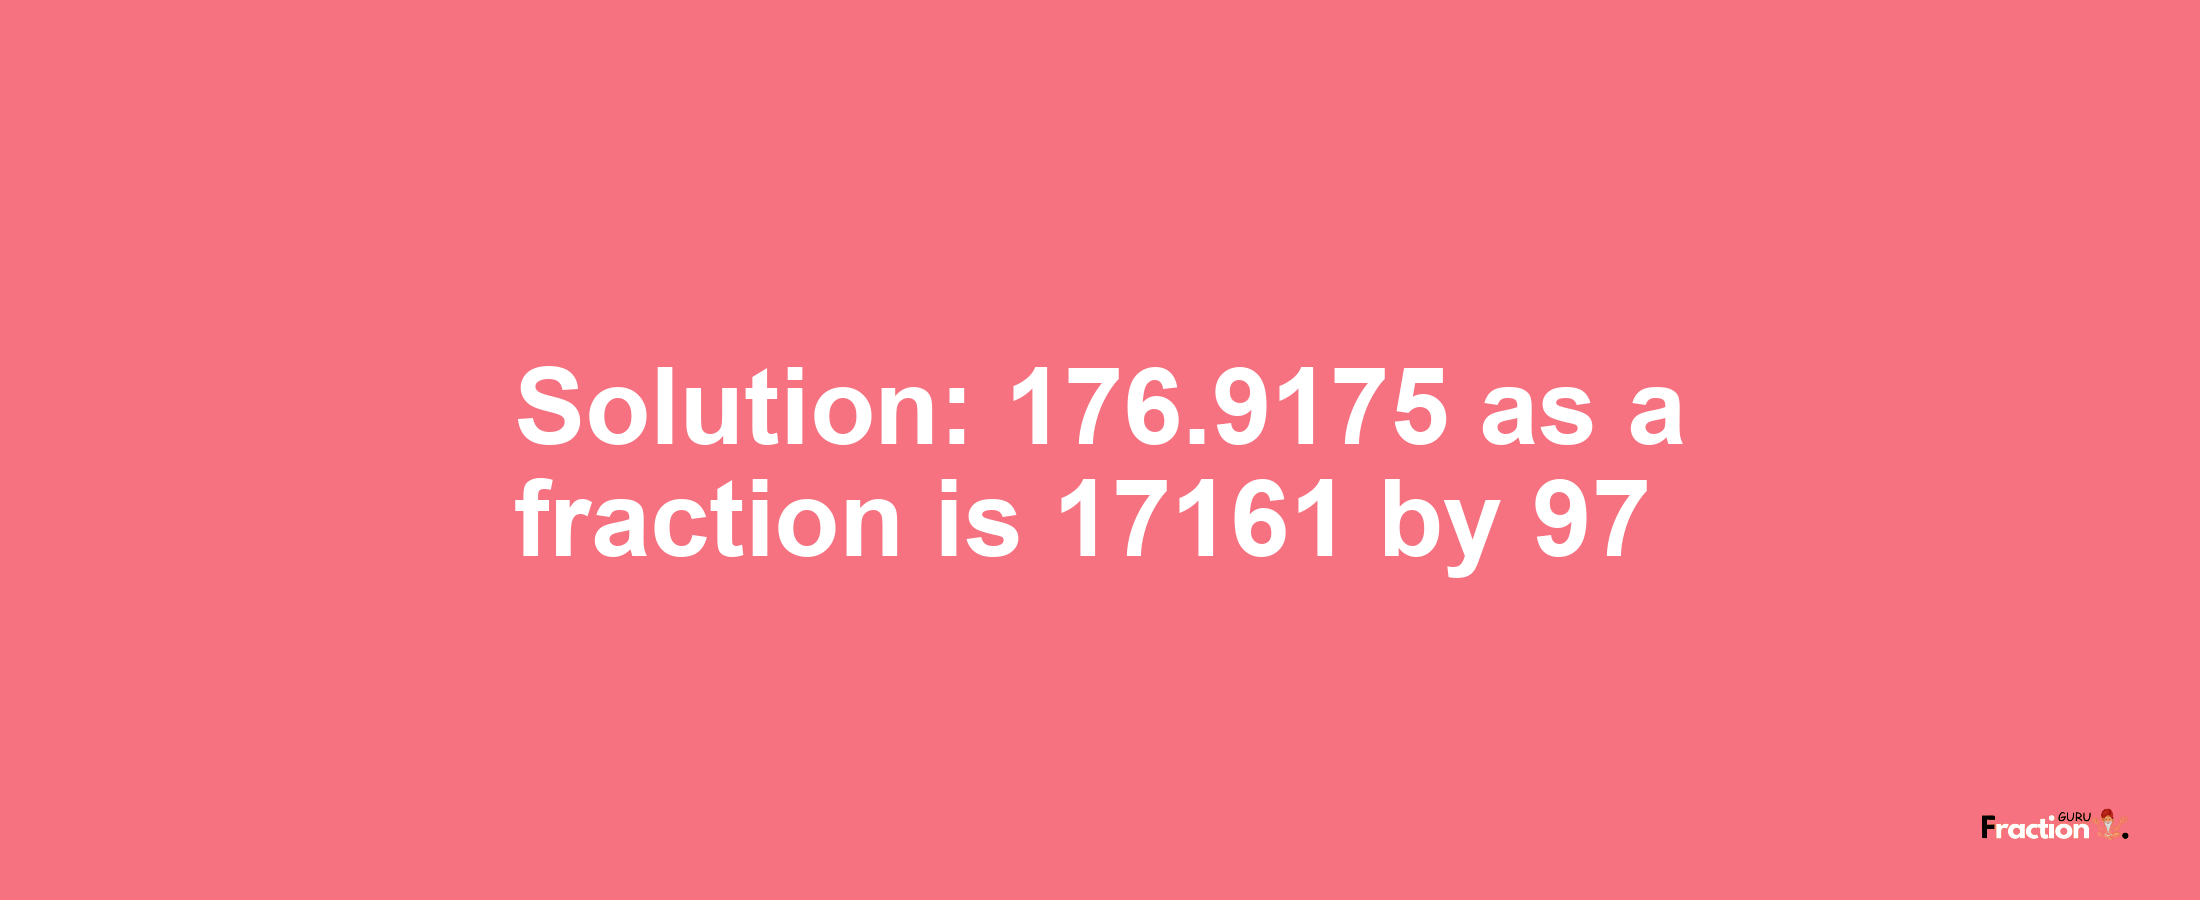 Solution:176.9175 as a fraction is 17161/97